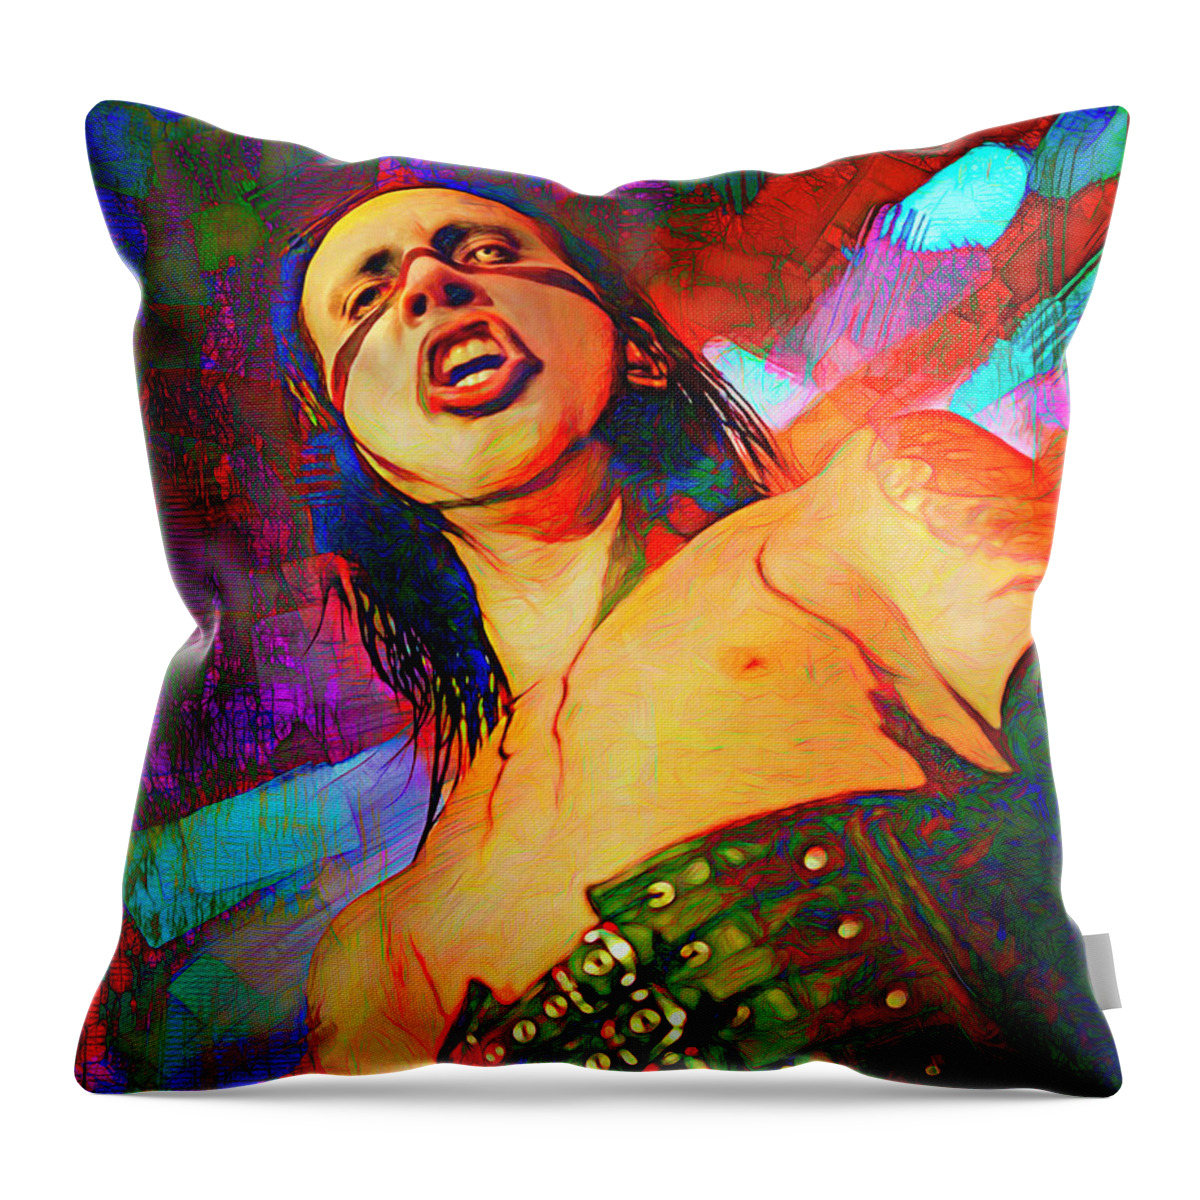 Marilyn Manson Throw Pillow featuring the mixed media Marilyn Manson by Mal Bray